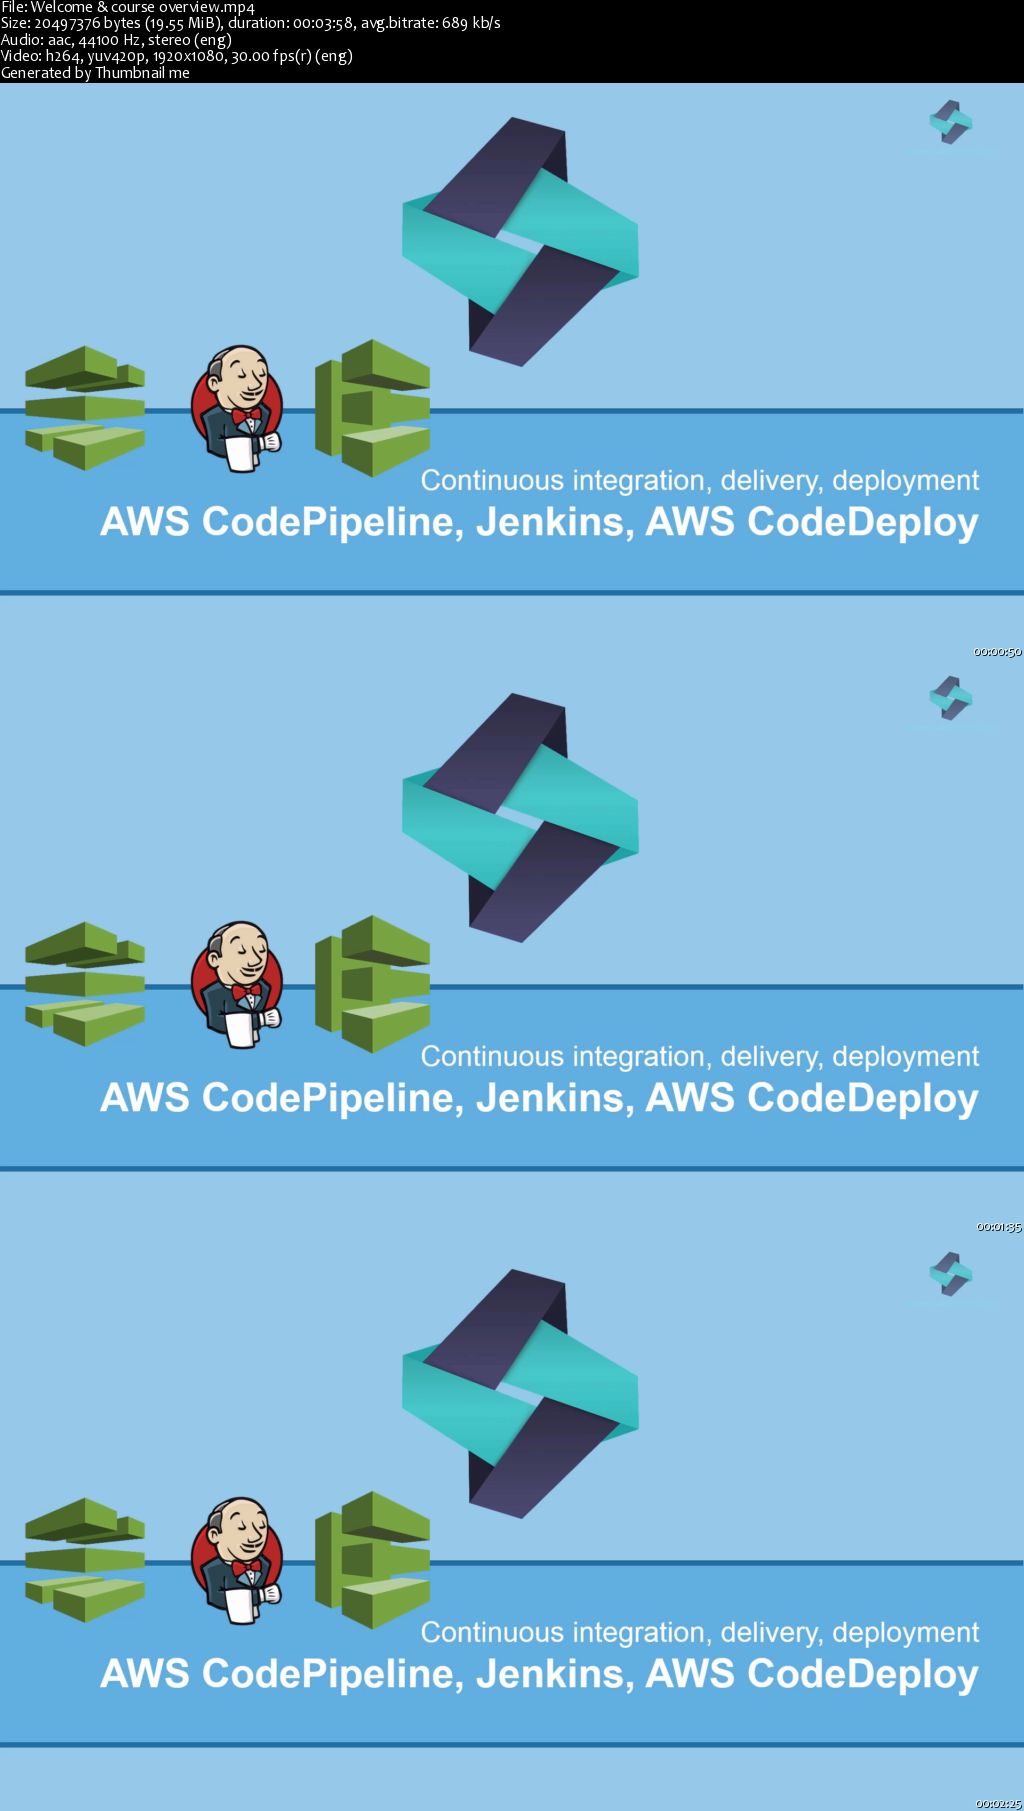 DevOps with AWS CodePipeline, Jenkins and AWS CodeDeploy